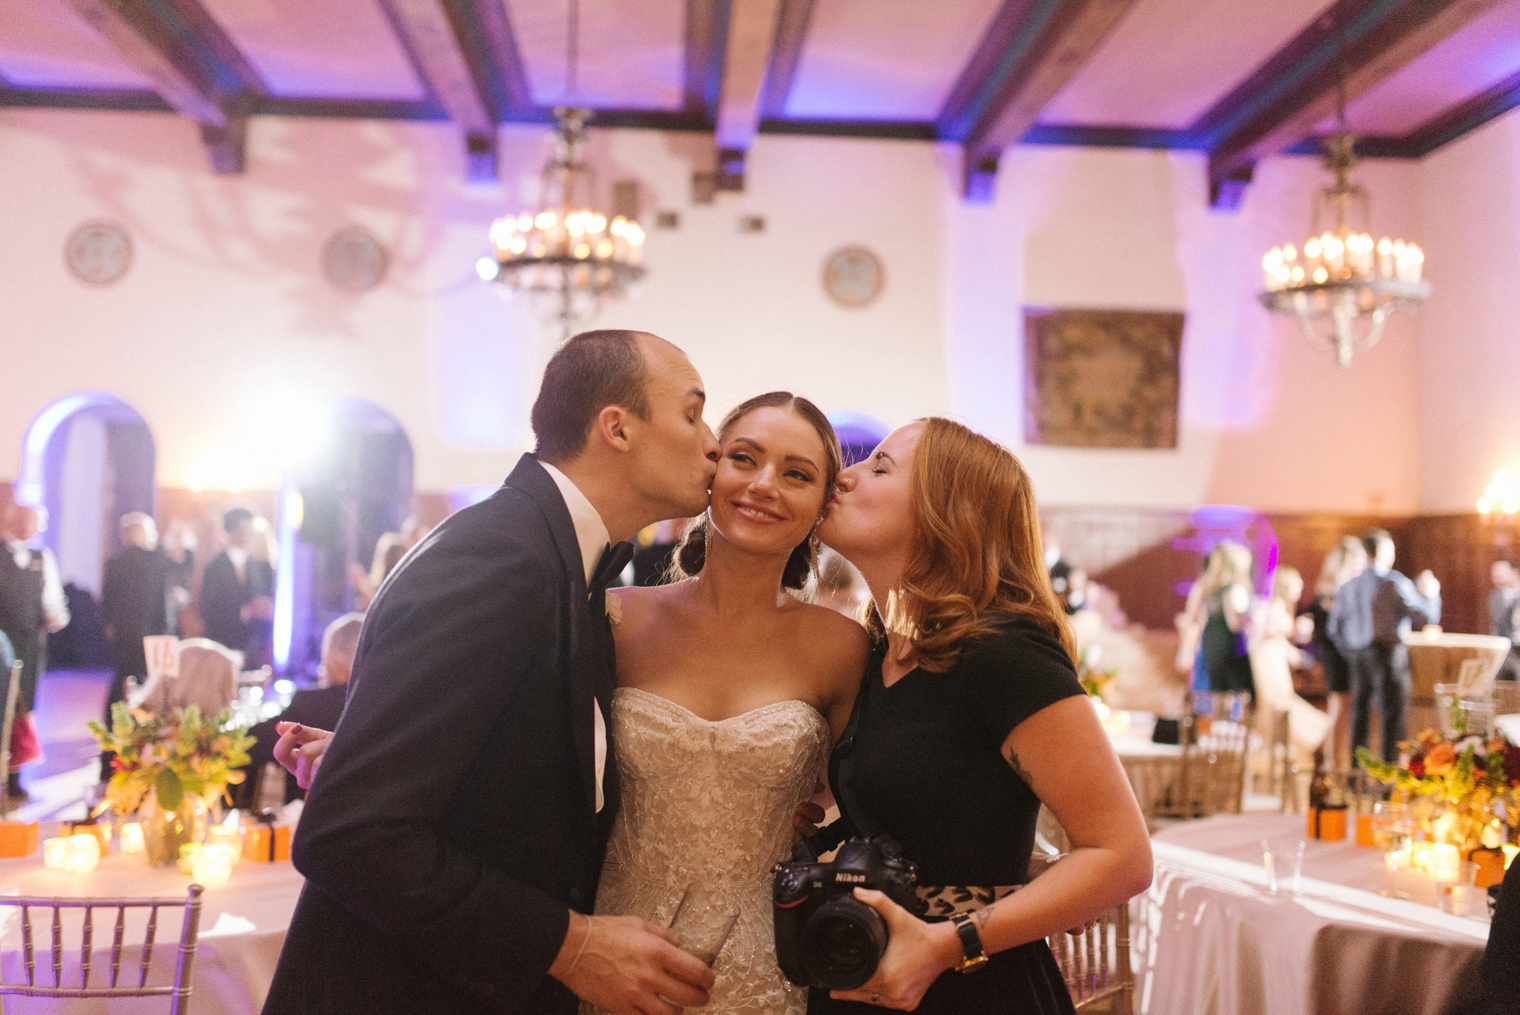 Wedding Photographer Heather Jowett poses with her bride and groom at a Detroit Yacht Club wedding.